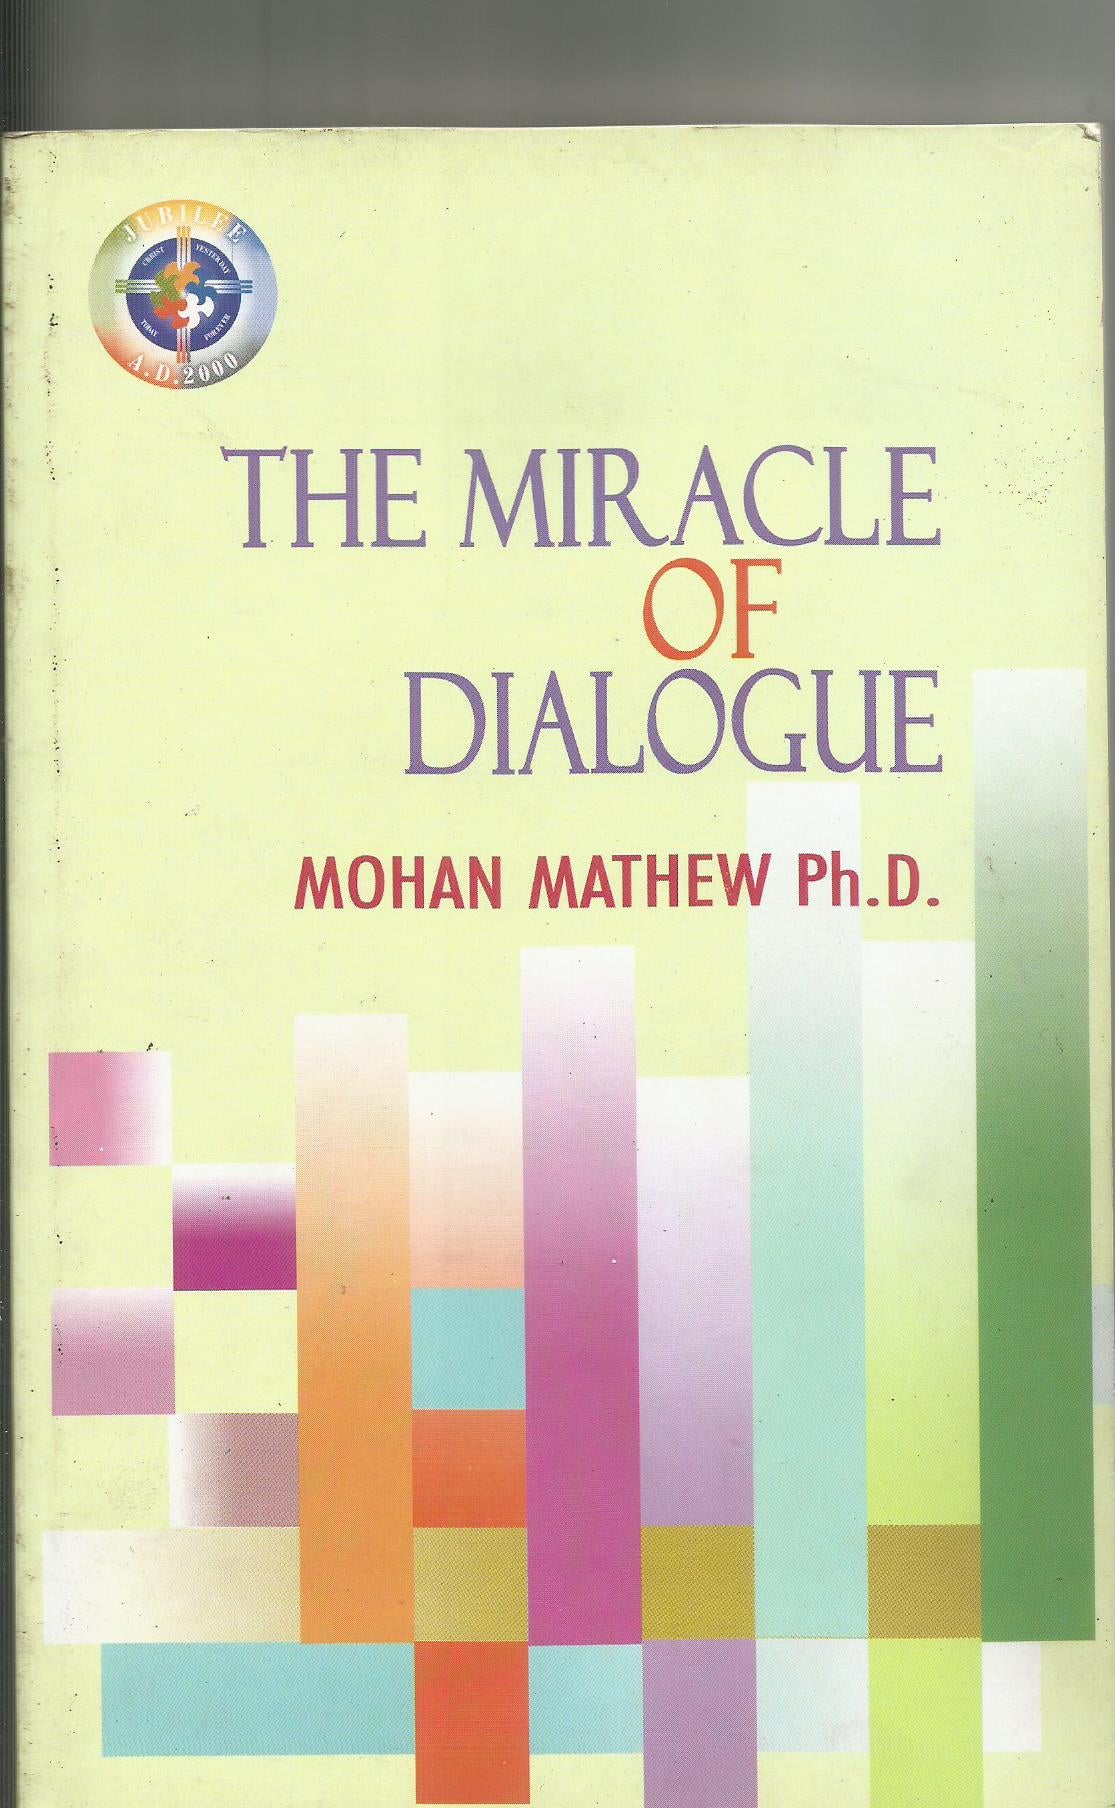 THE MIRACLE OF DIALOGUE - sophiabuy